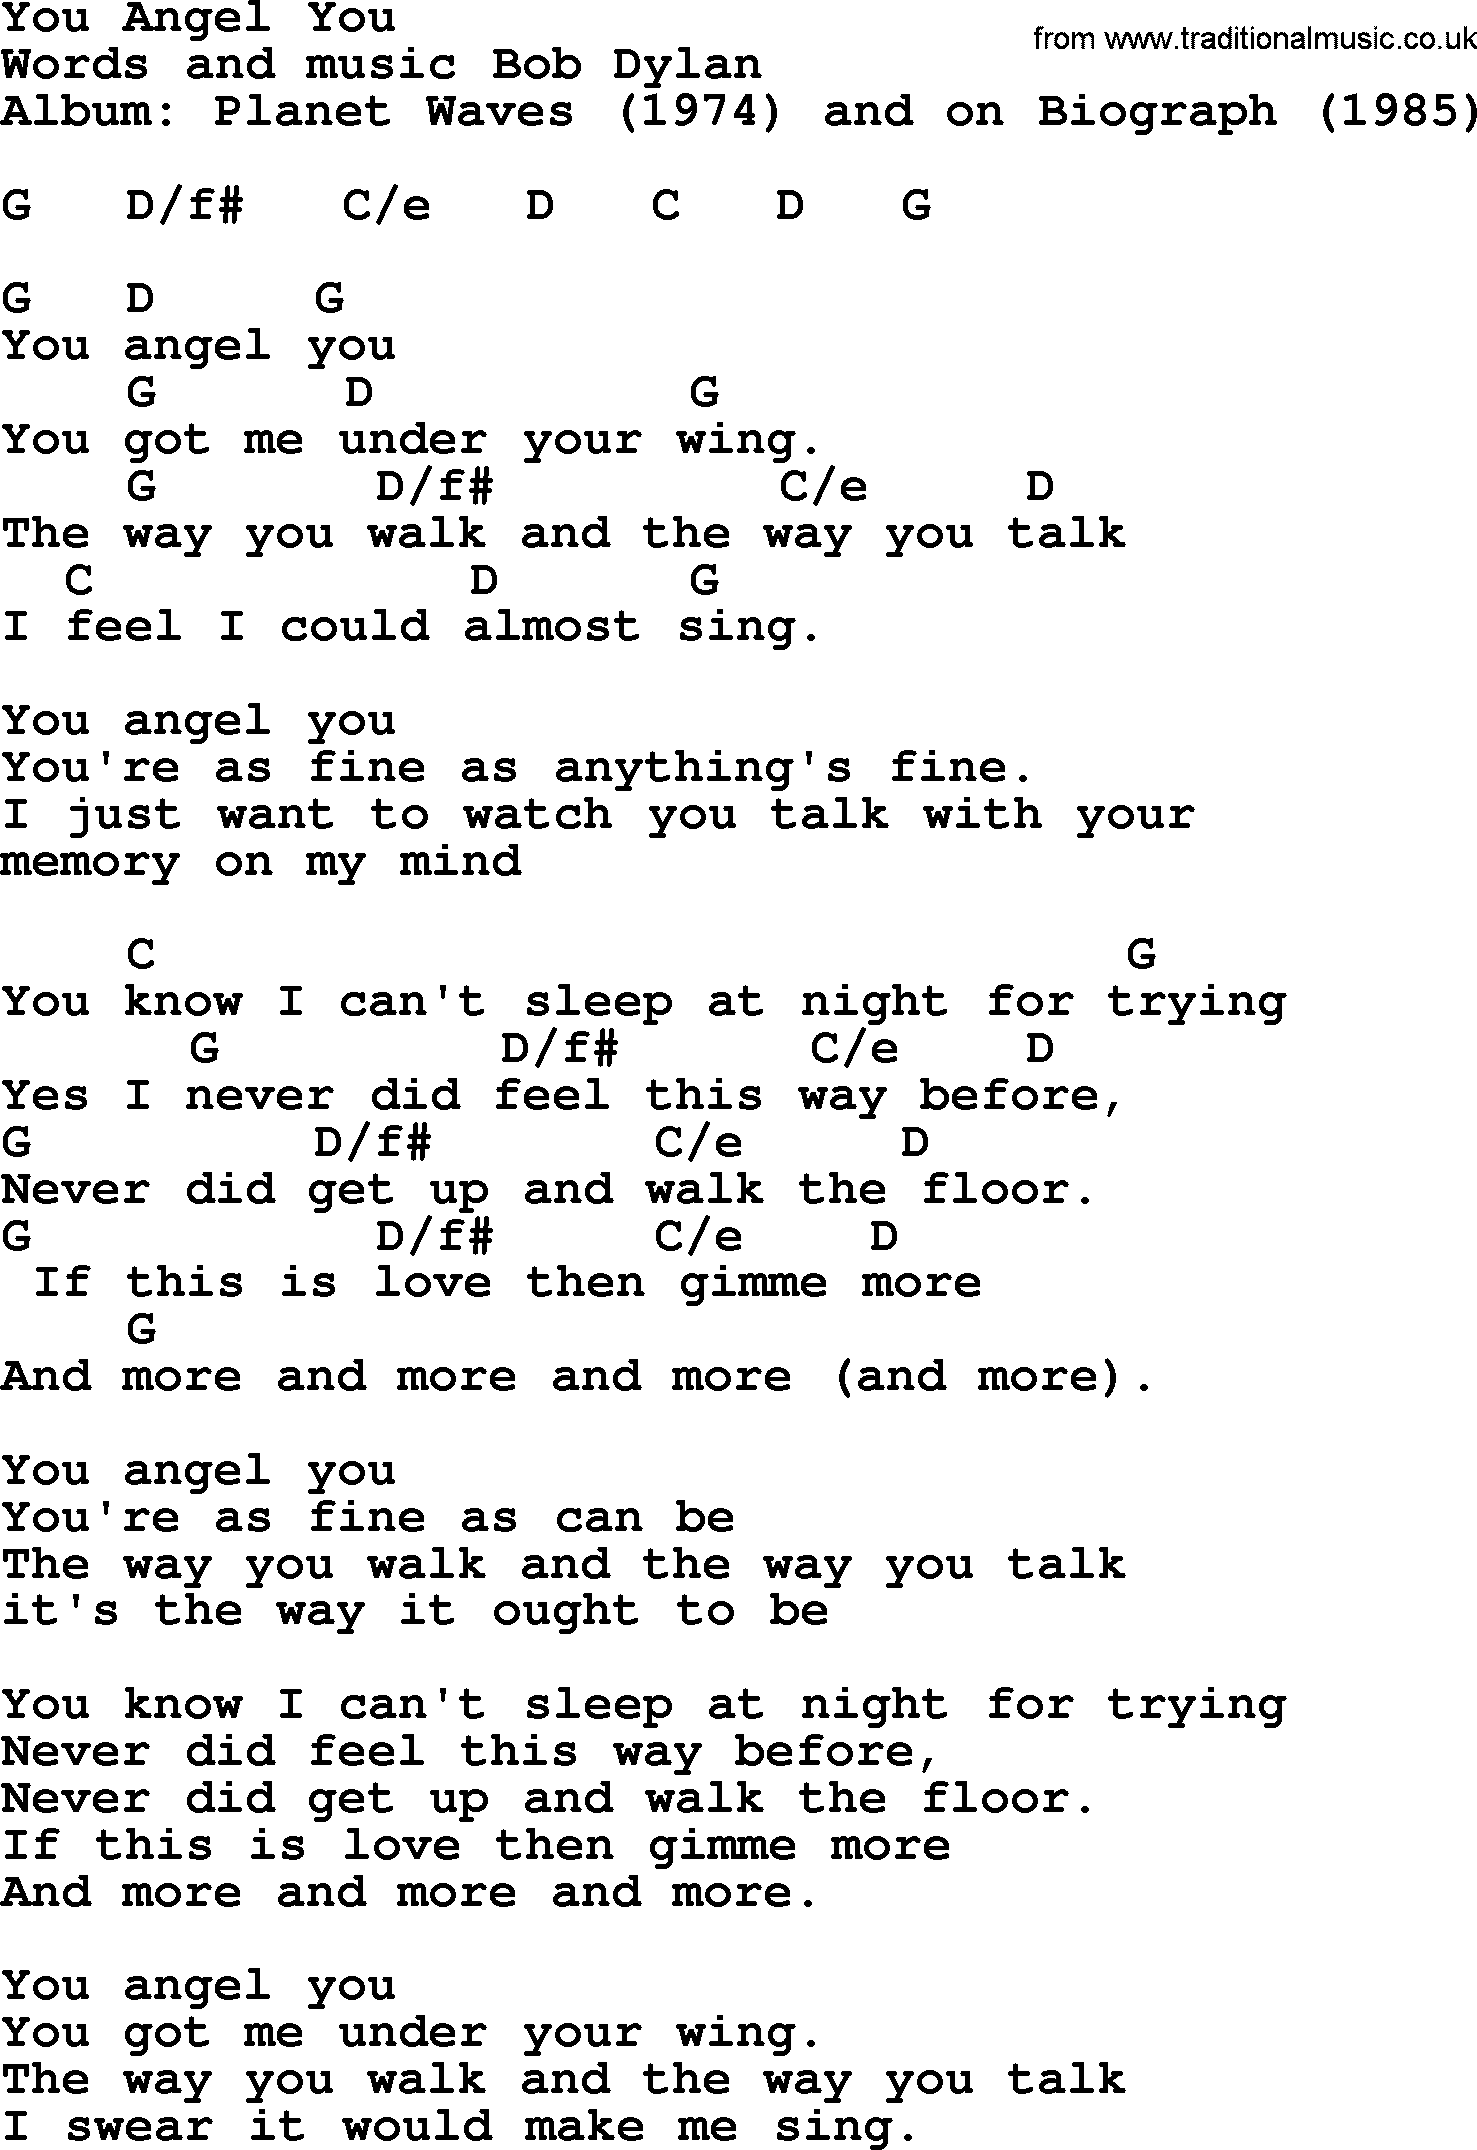 Bob Dylan song, lyrics with chords - You Angel You